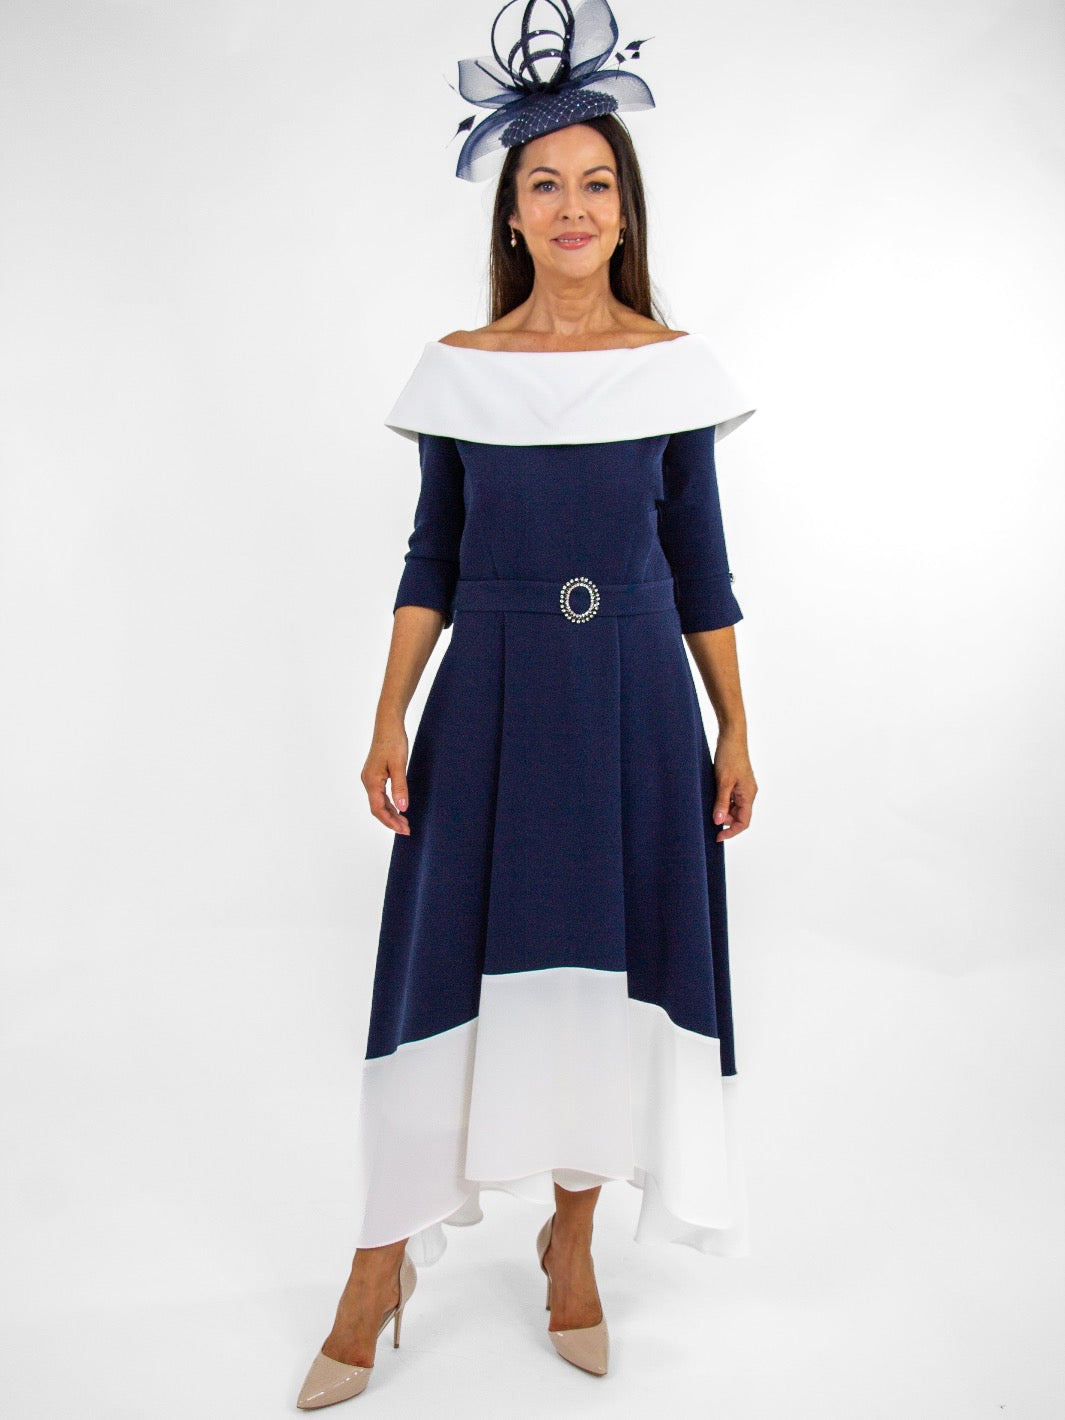 Claudia C Diana Dress In Navy / White-Occasion Wear-Guest of the wedding-Nicola Ross